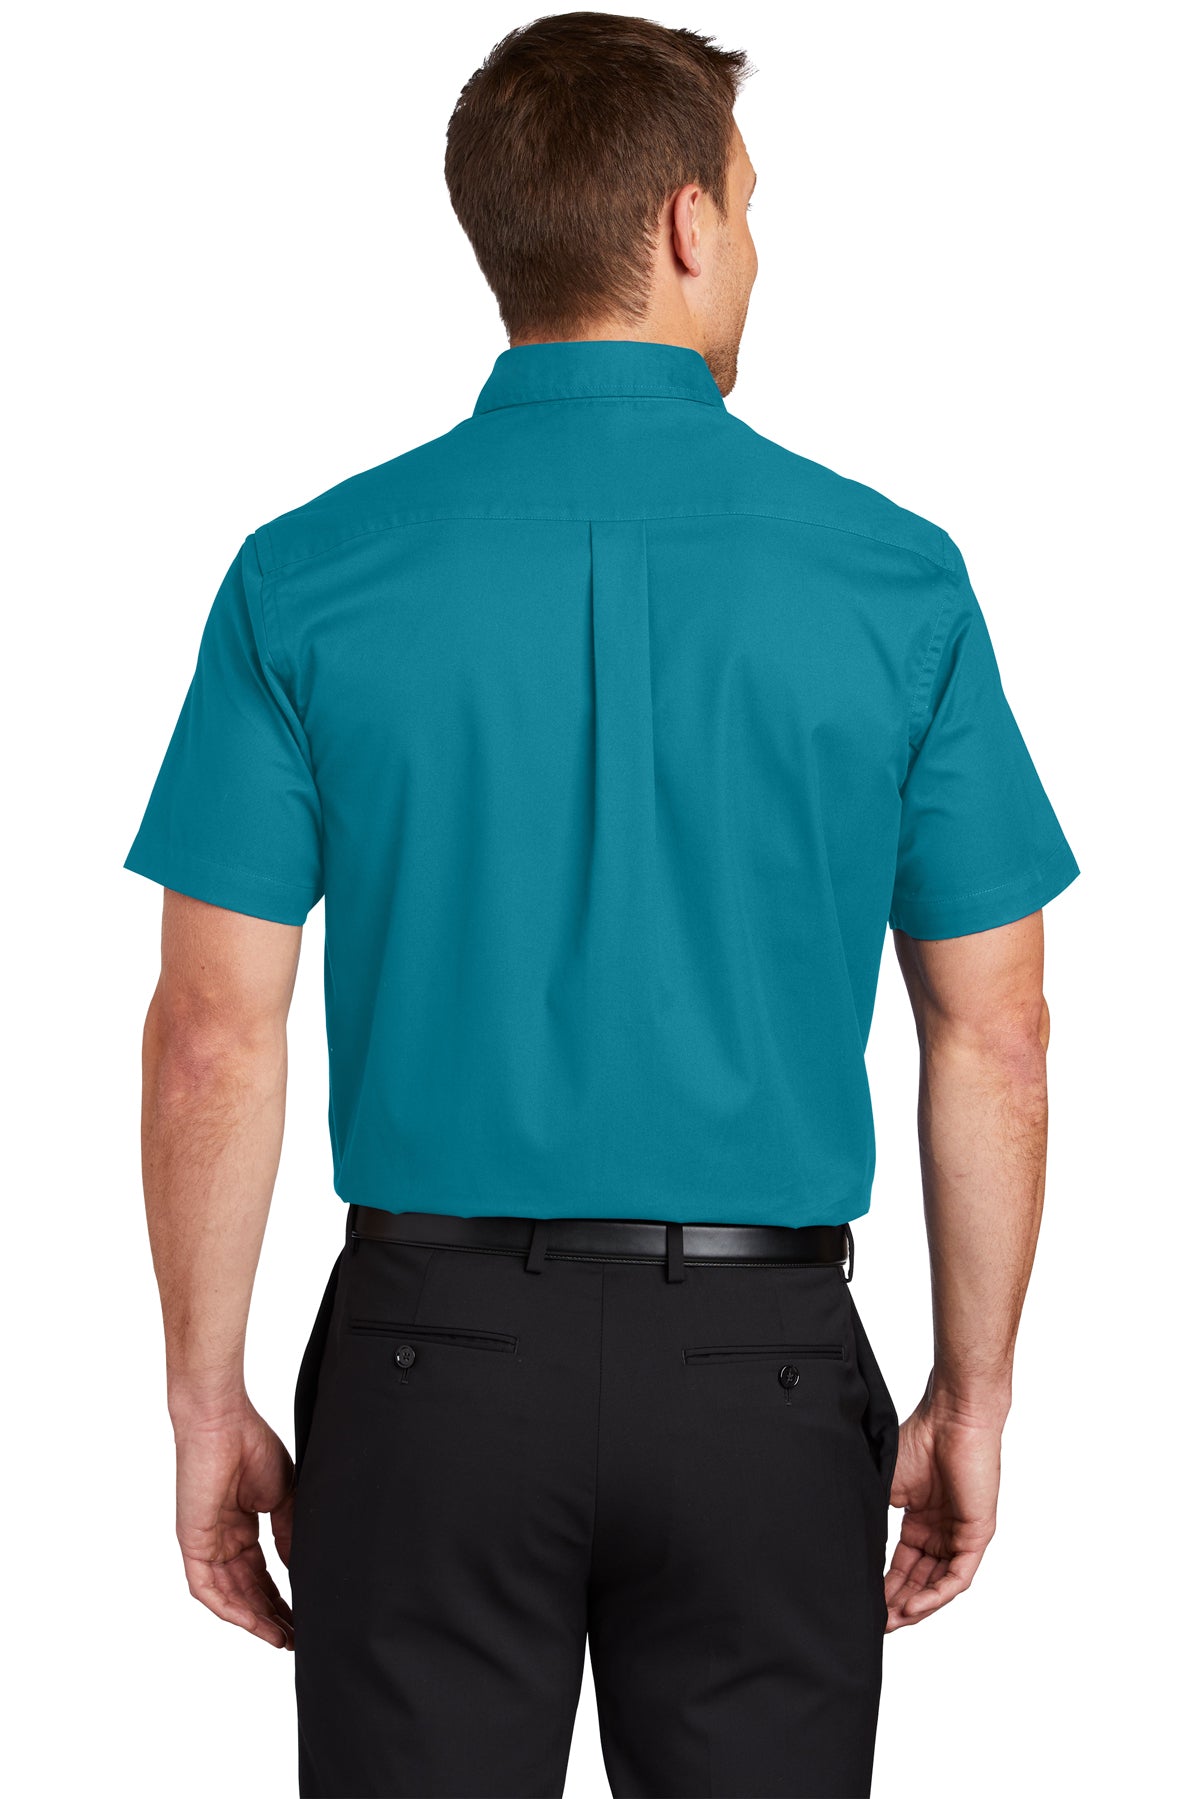 port authority_tls508 _teal green_company_logo_button downs